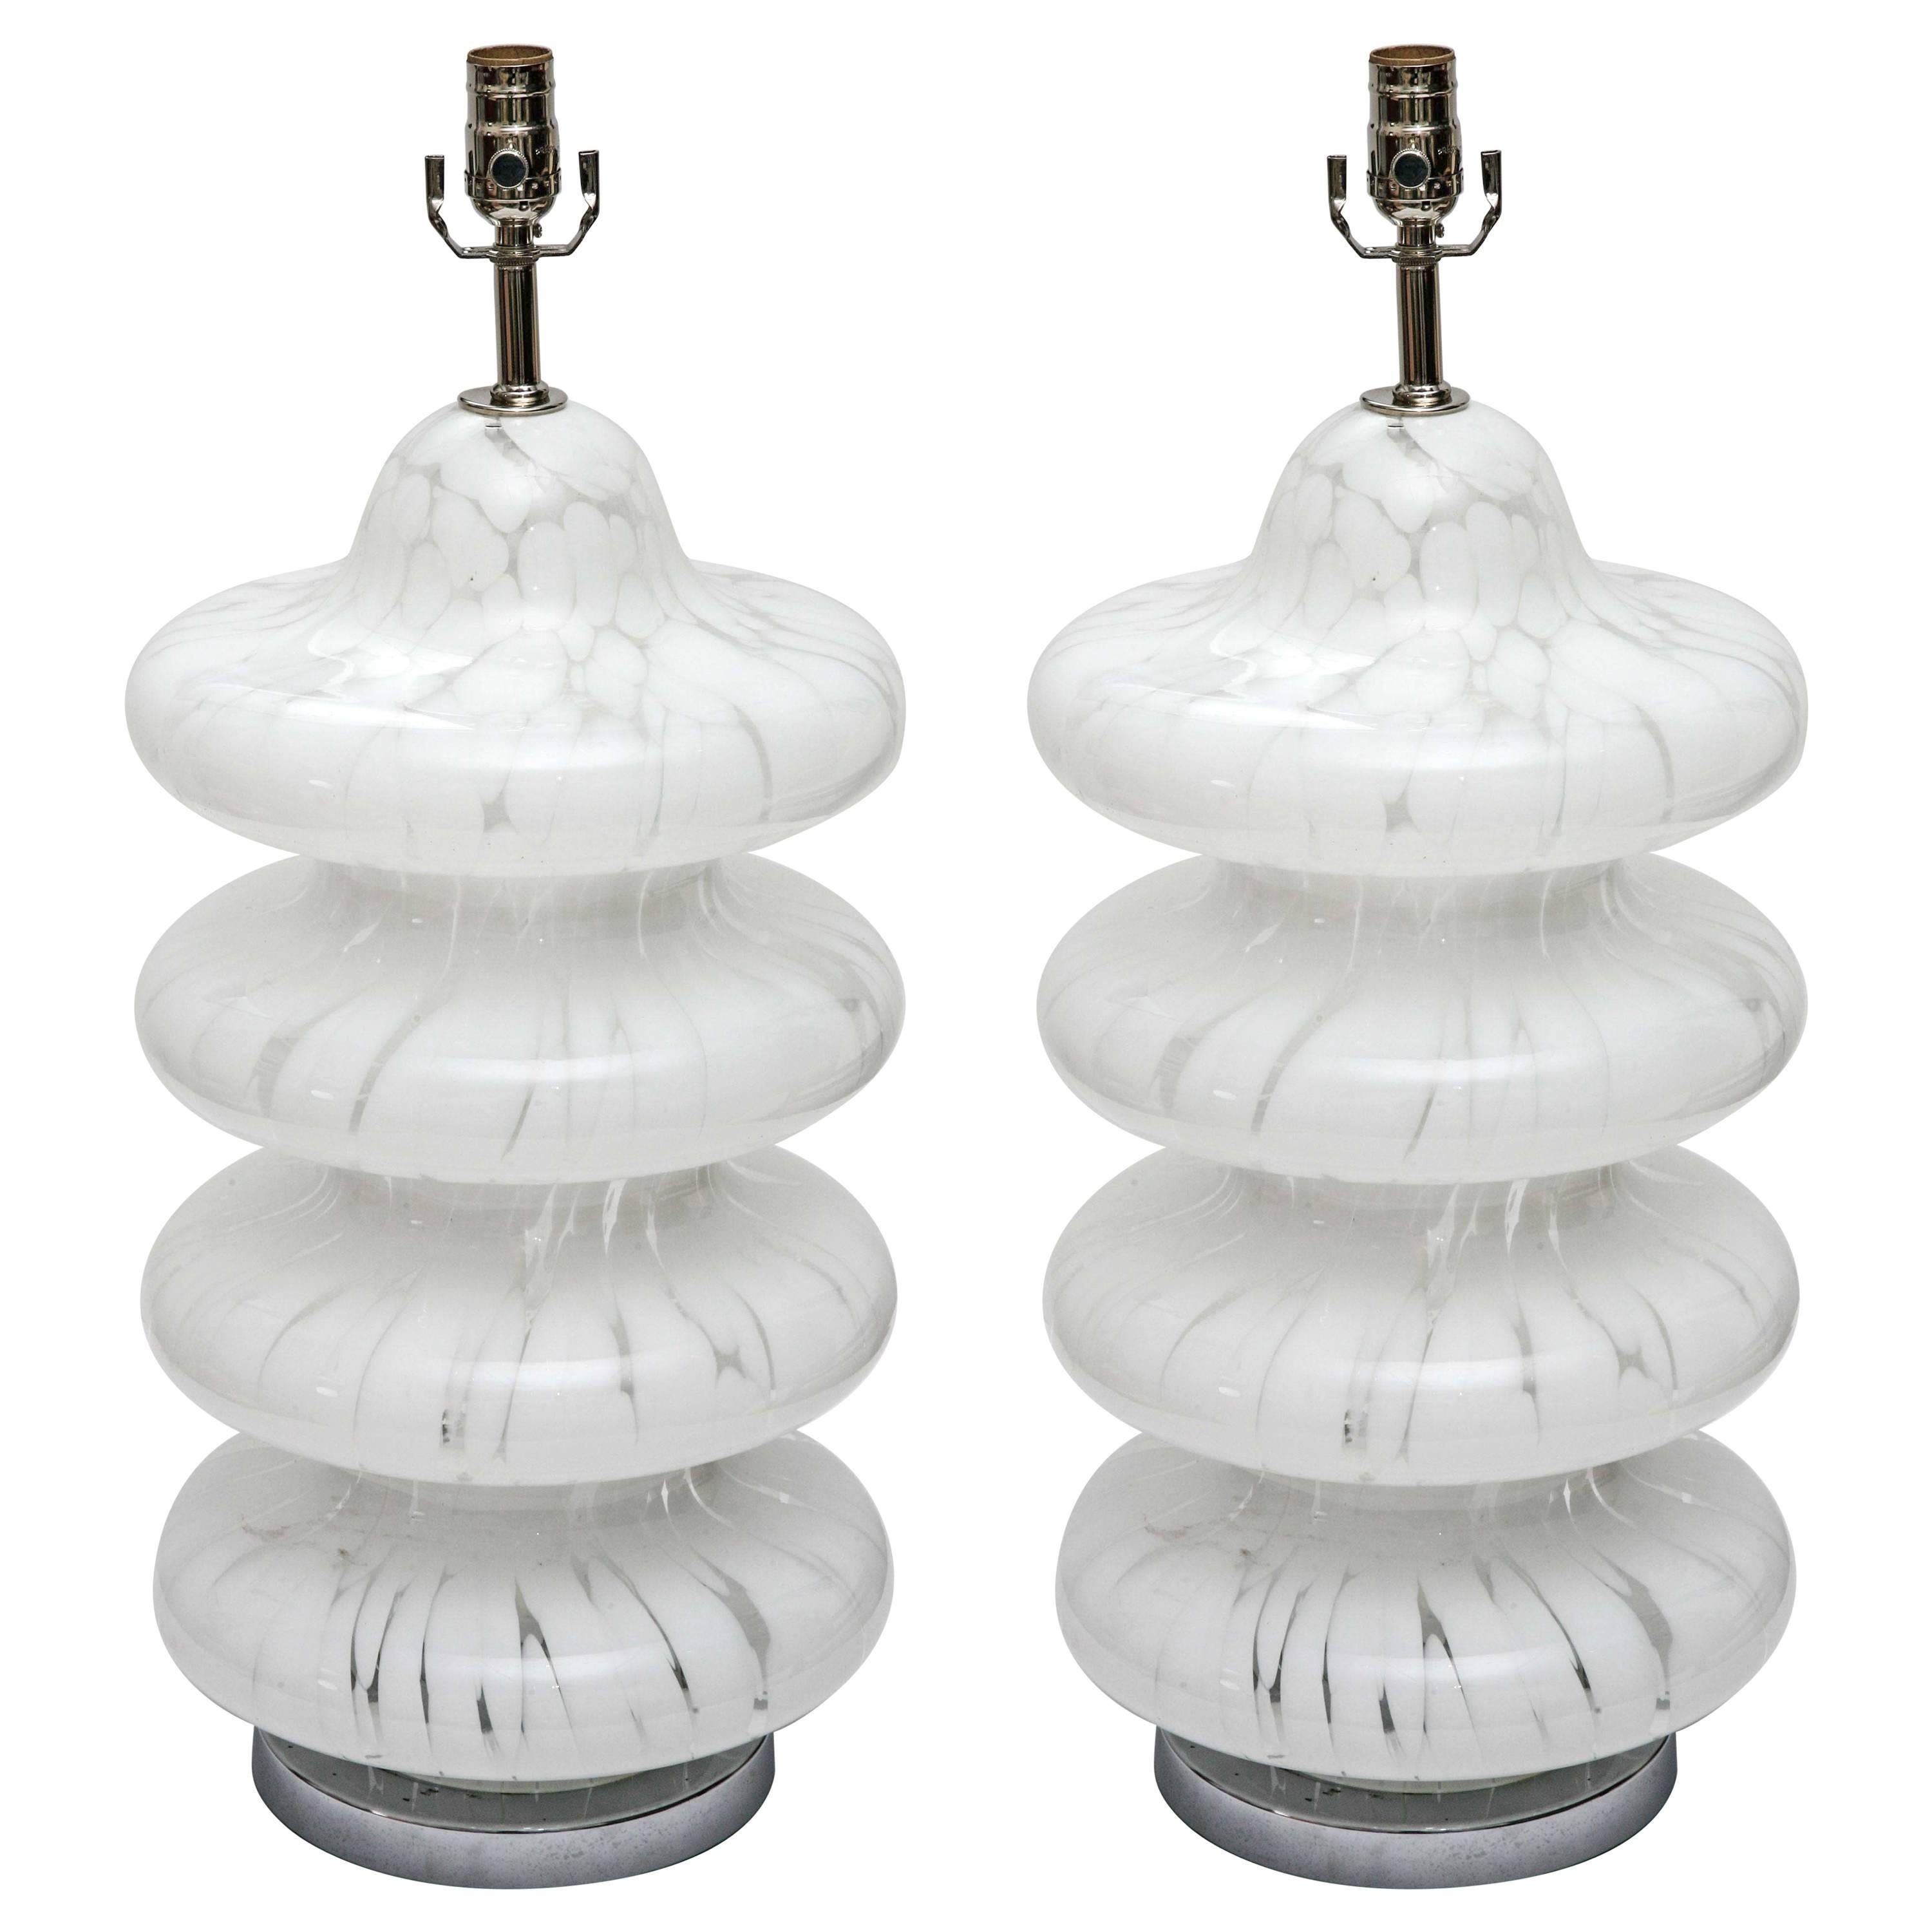 Pair of Vintage Murano Glass Lamps